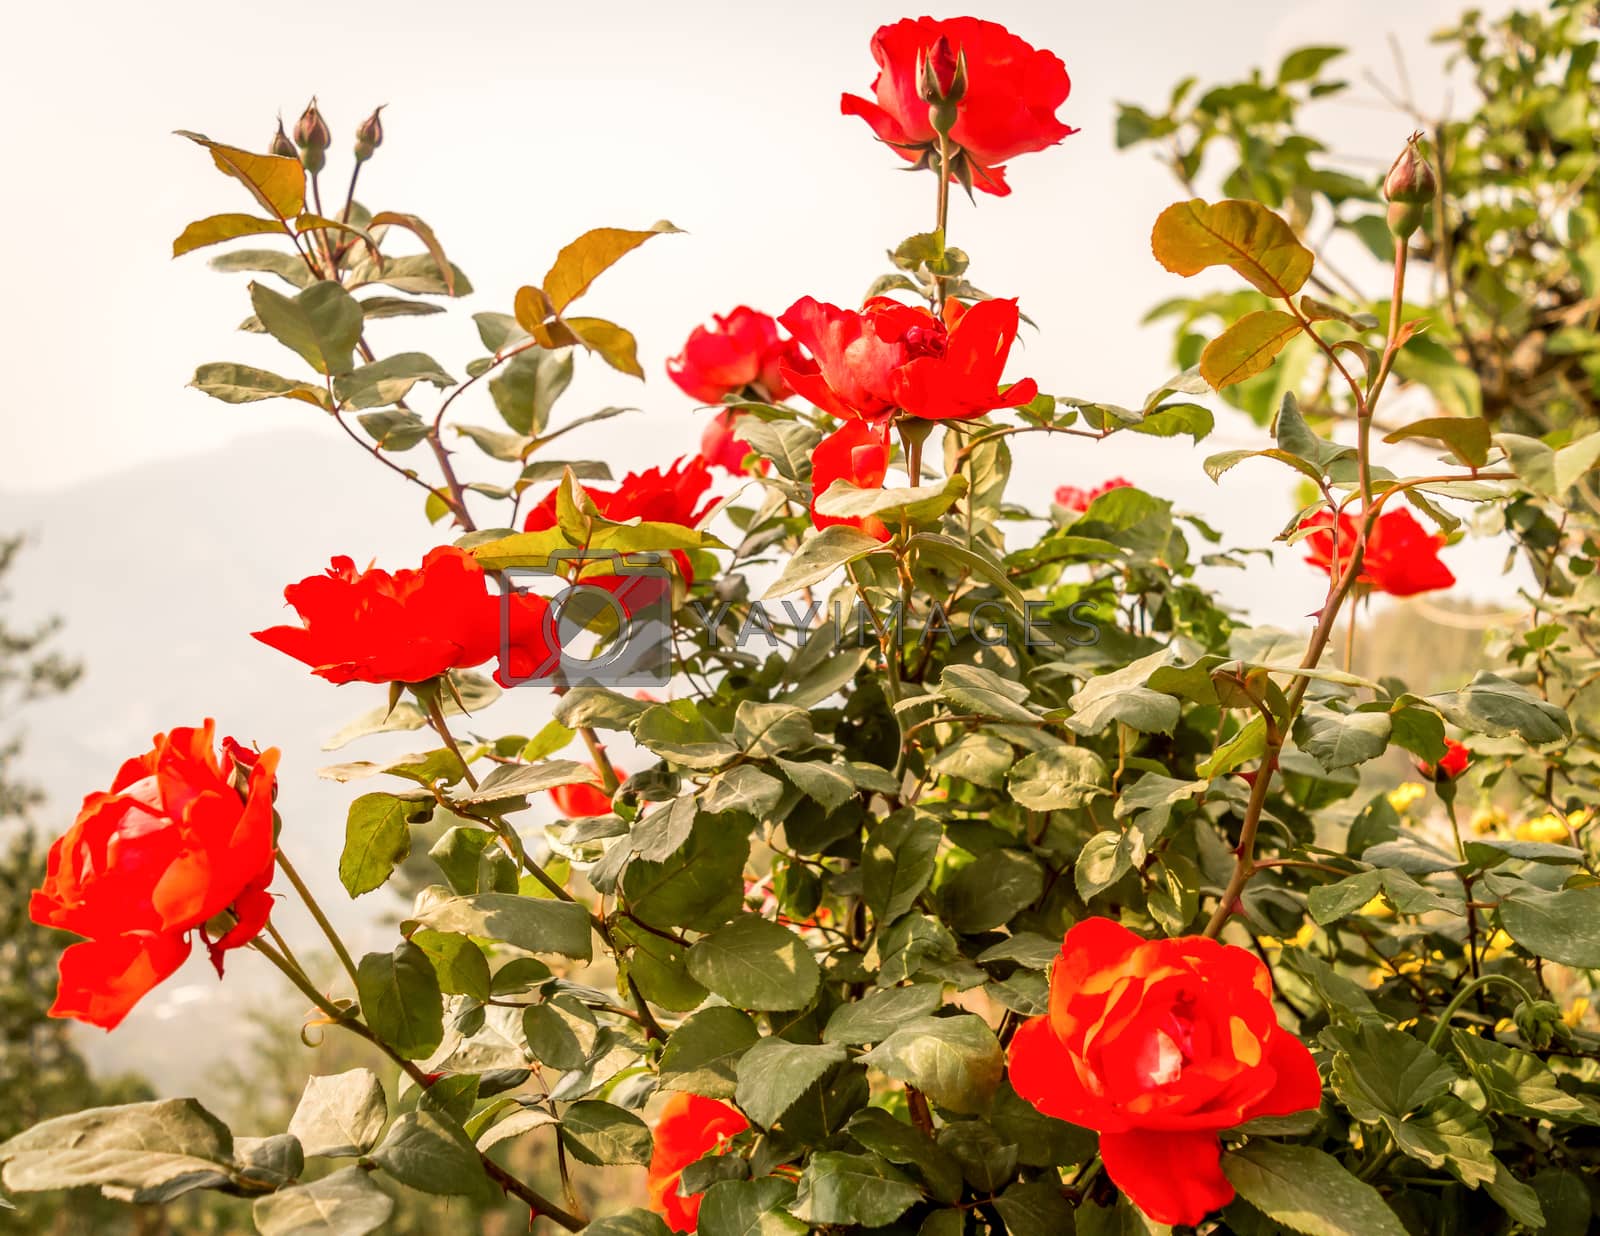 Royalty free image of A wild rose tree in garden. (Rosa rubiginosa) a perennial flowering ornamental plants shrub large showy red color with sharp prickles in Rosaceae family grow for beauty and fragrant. by sudiptabhowmick